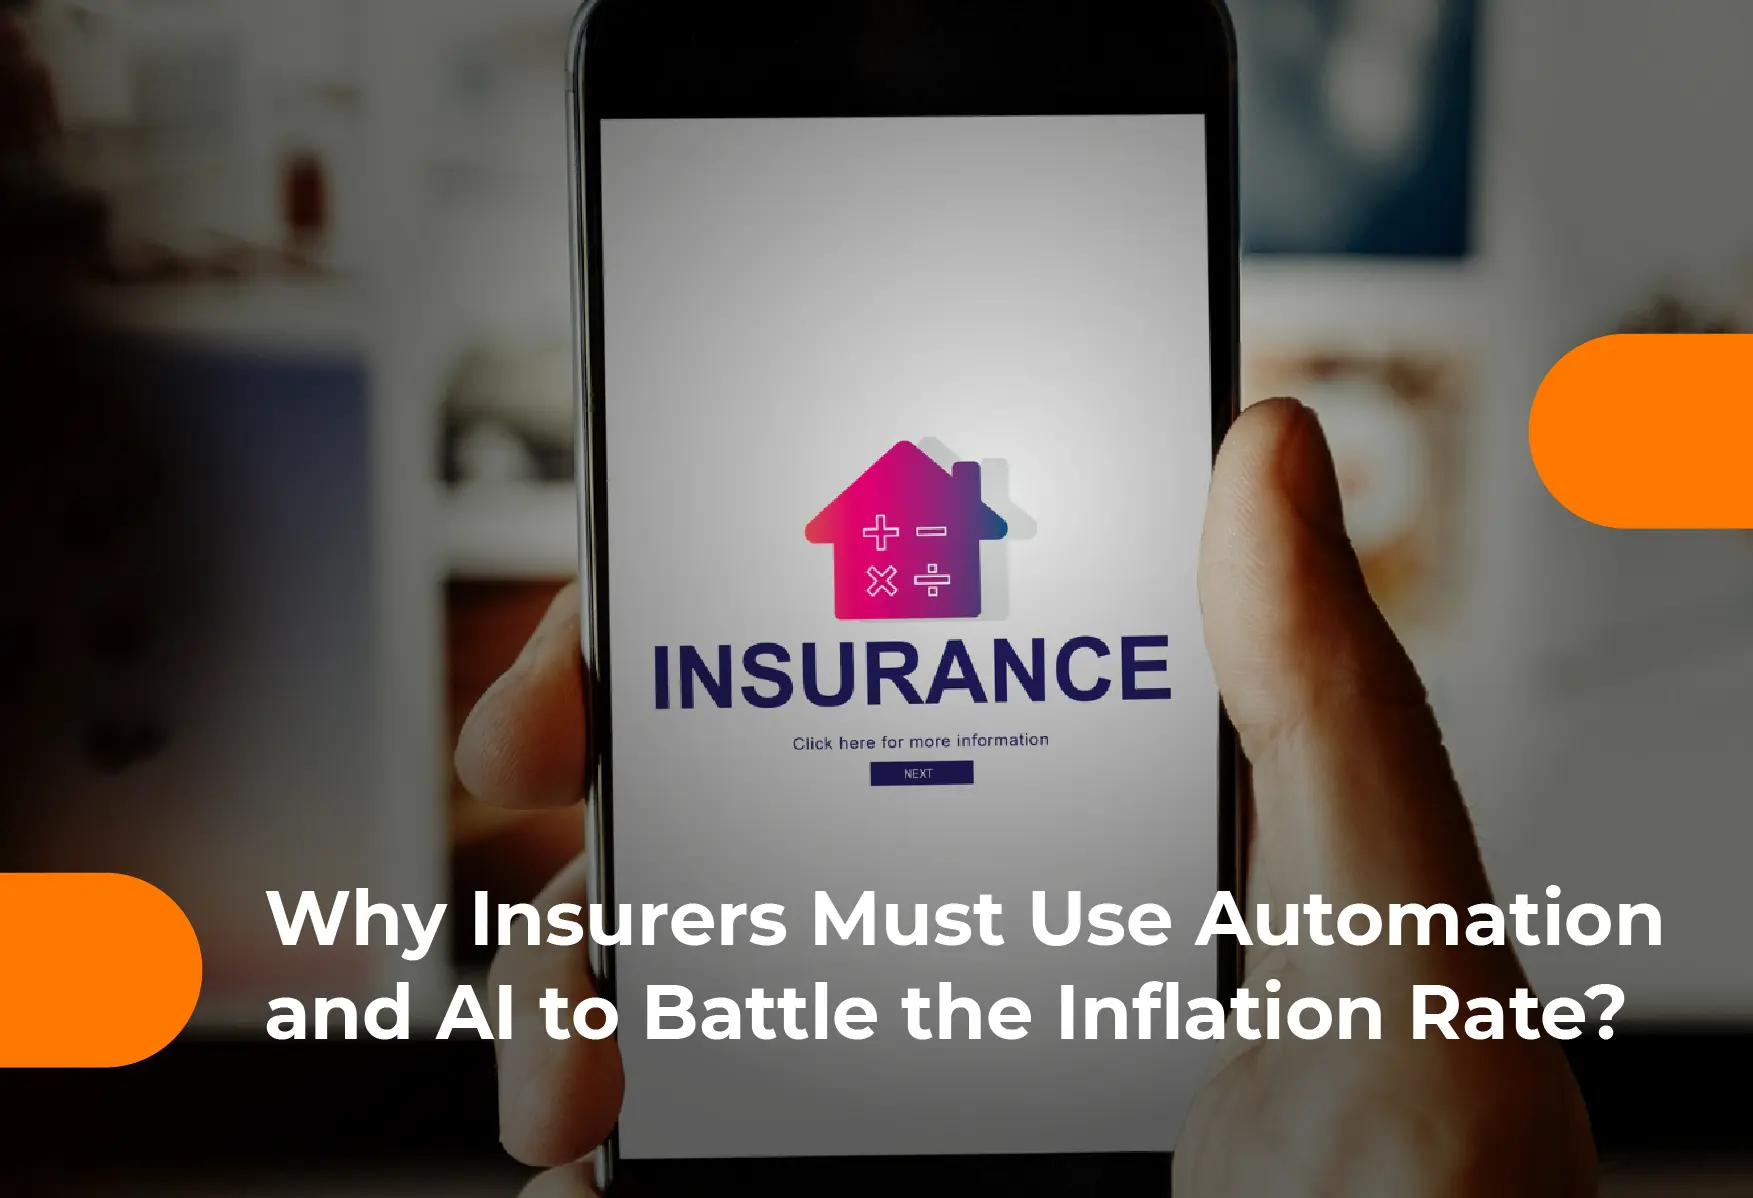 Battling Inflation in Insurance with Automation and AI